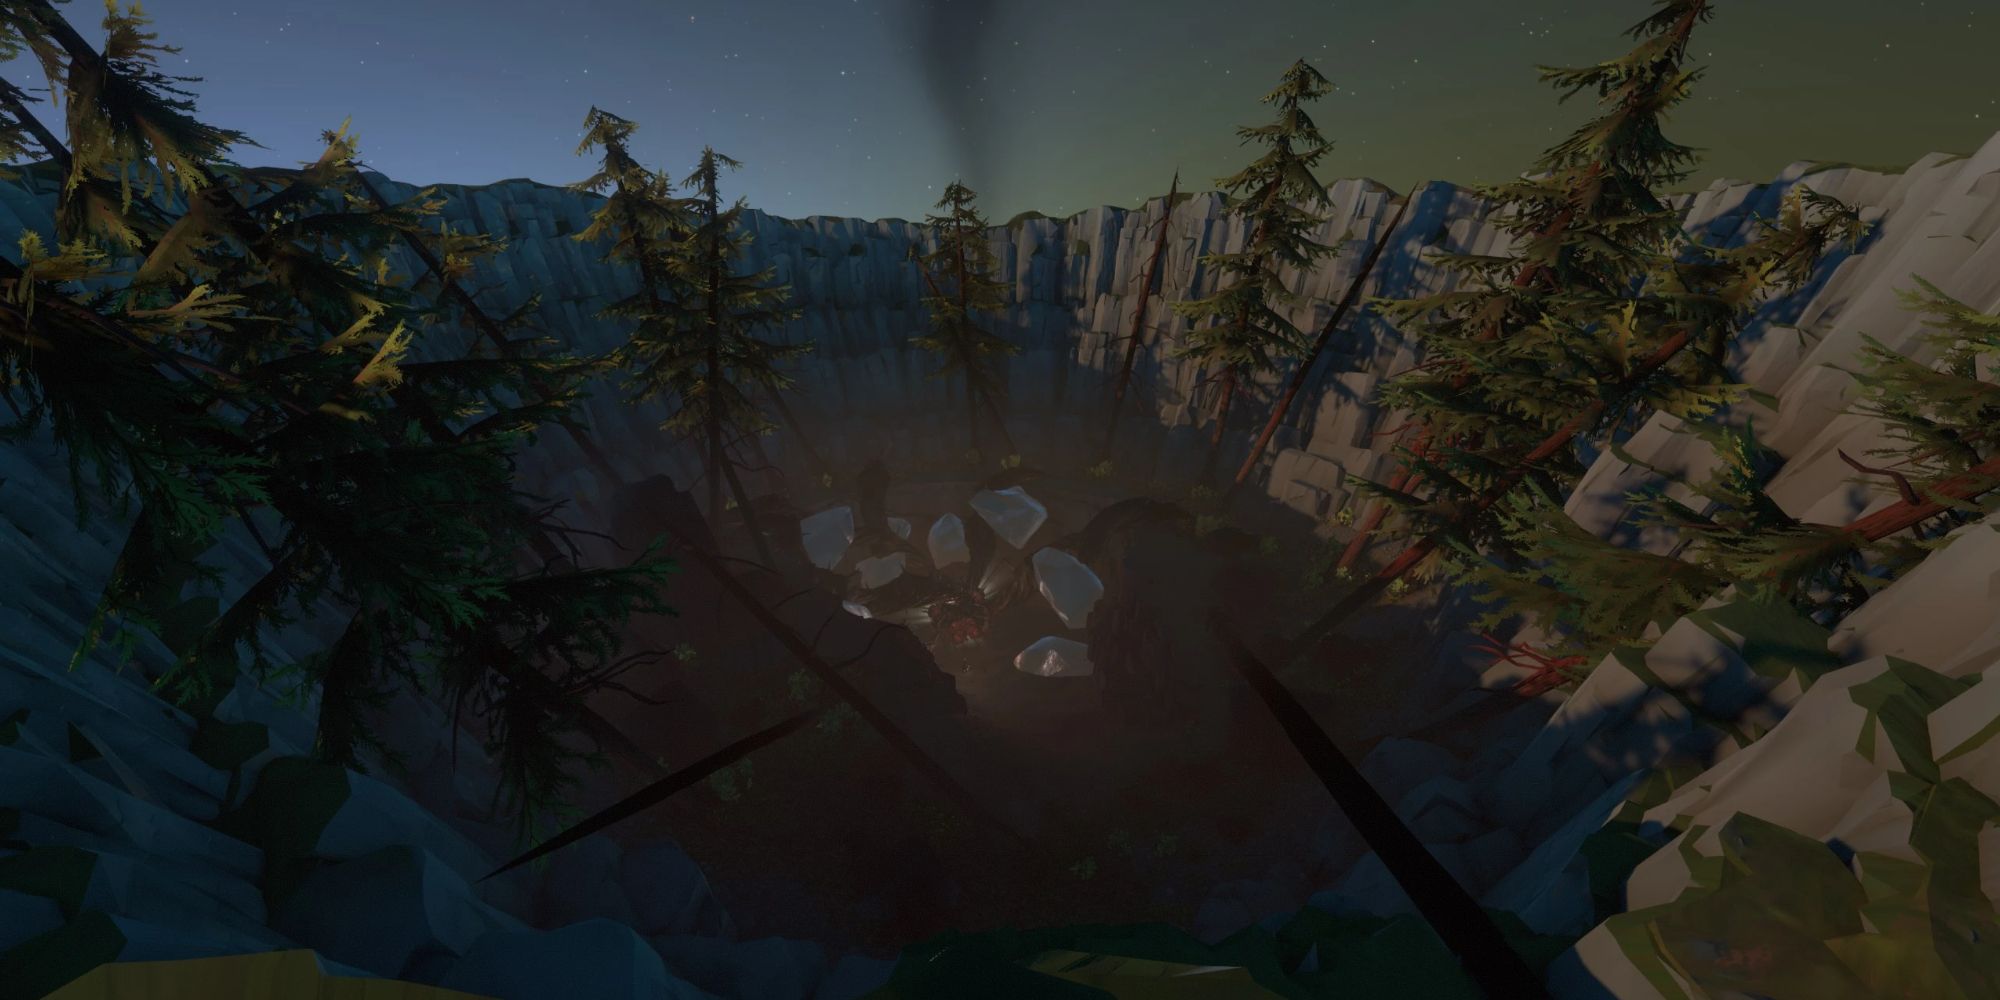 Outer Wilds Timber Hearth holds many secrets outside of the starting village